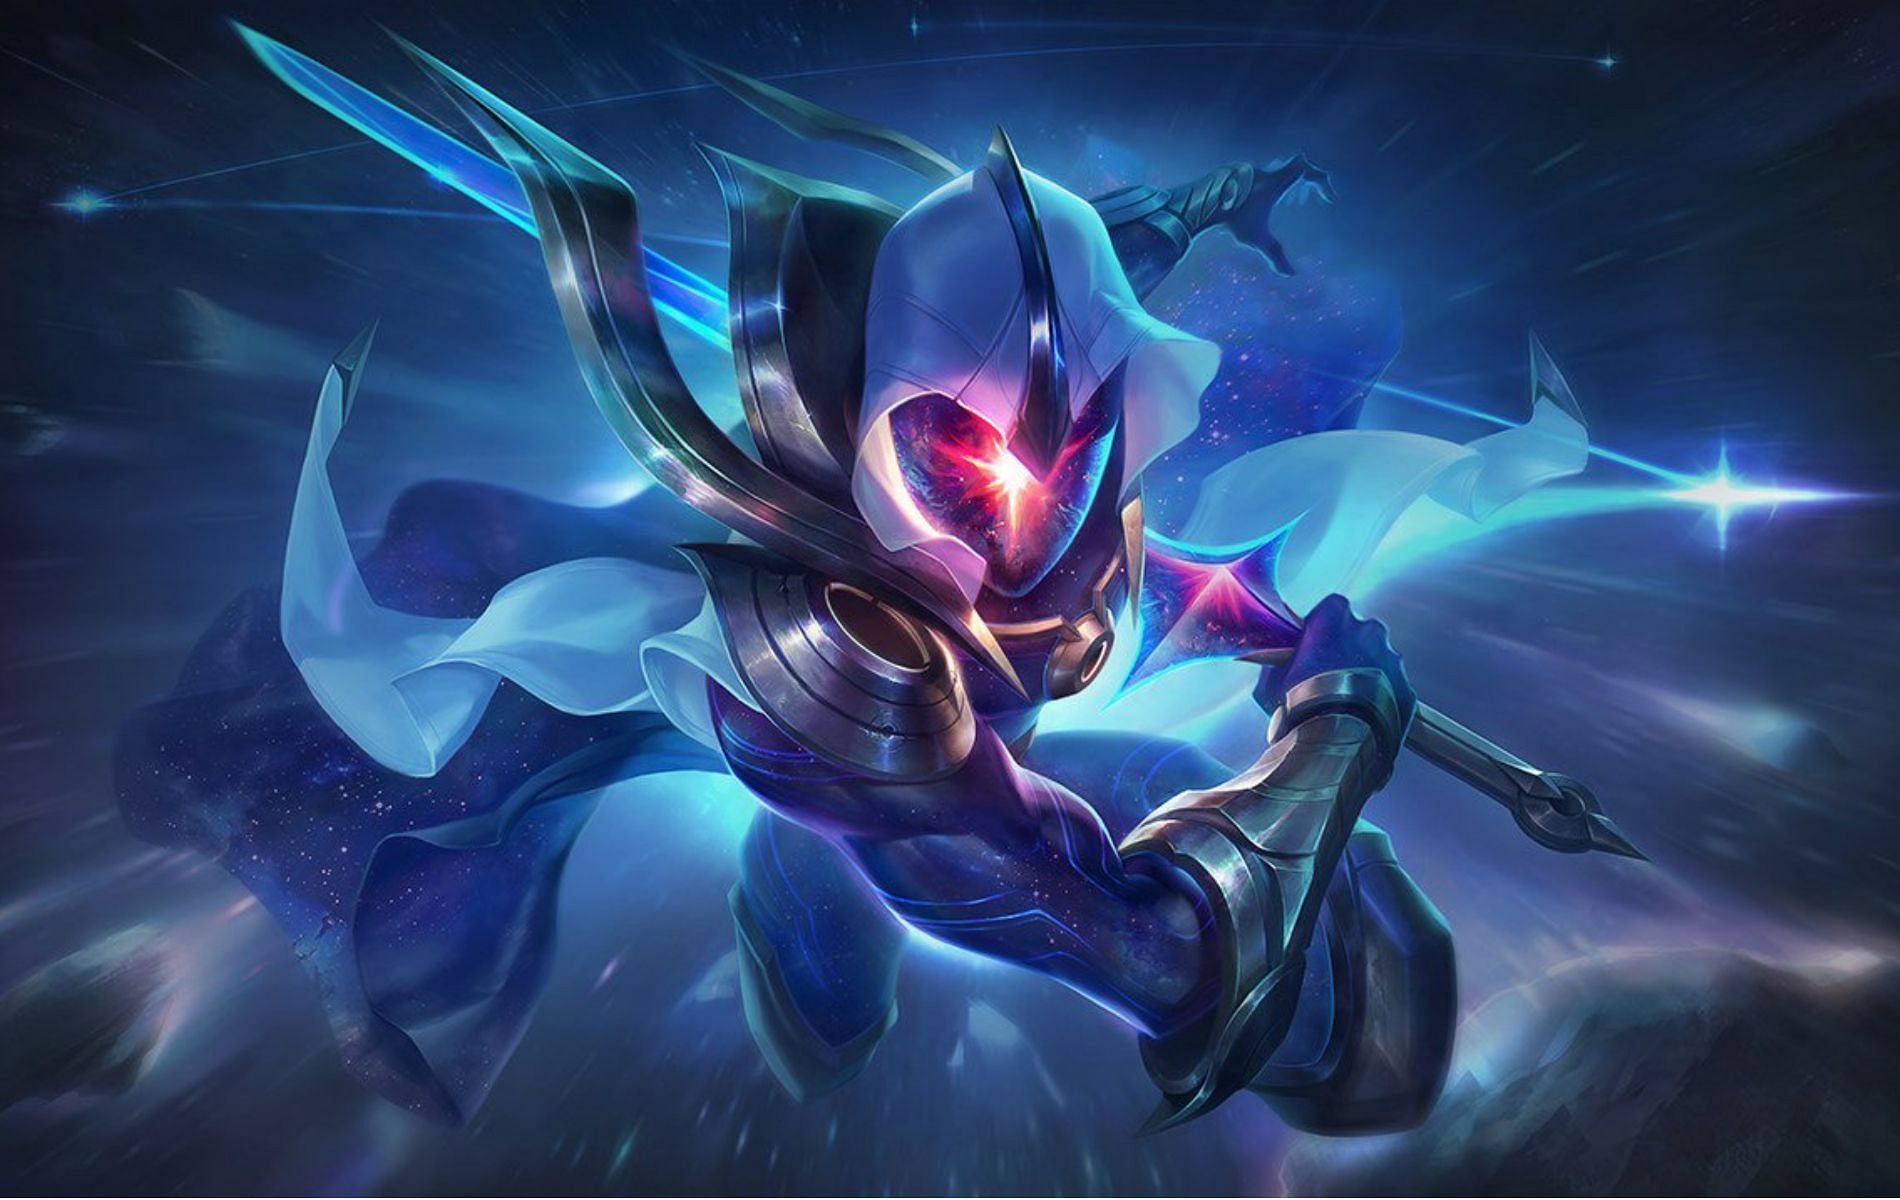 All Master Yi changes in the League of Legends PBE patch 12.13 cycle (Image via Riot Games)